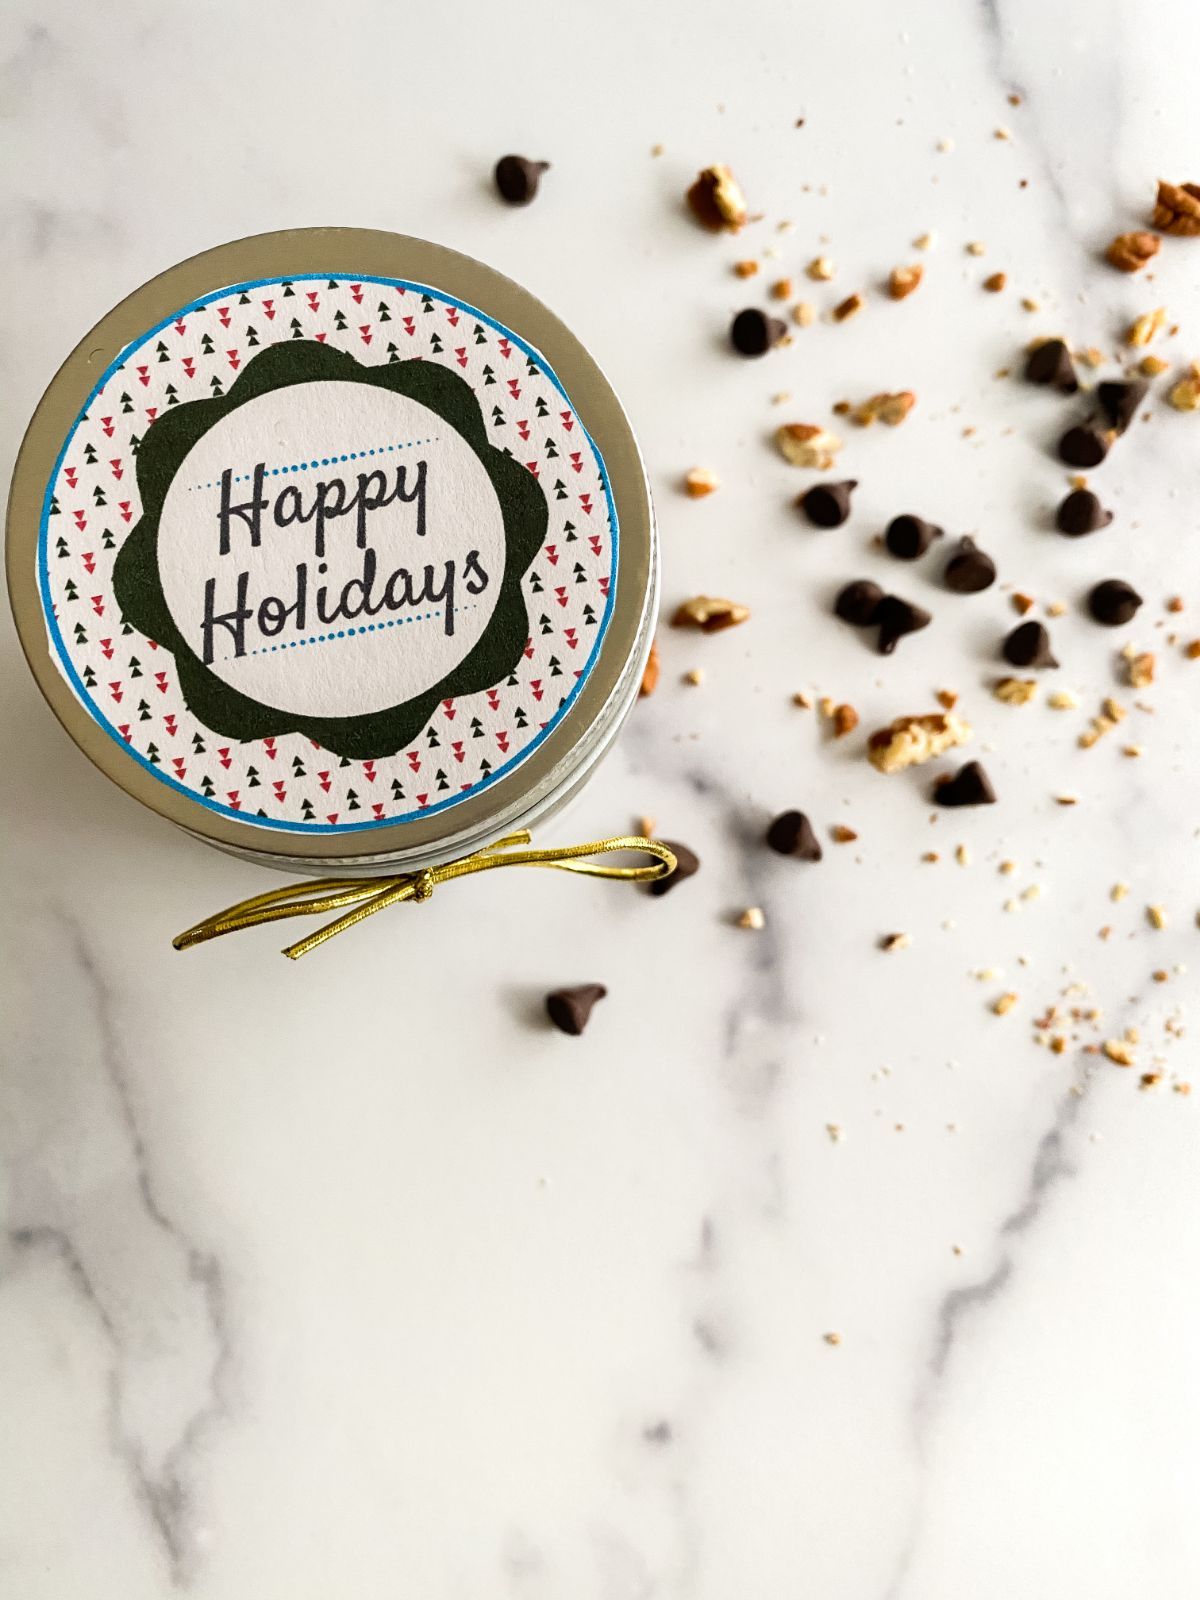 Overhead shot of the Brownie Mix in a jar showing the text at the top of the jar saying "Happy Holidays" next to chocolate chips on a counter